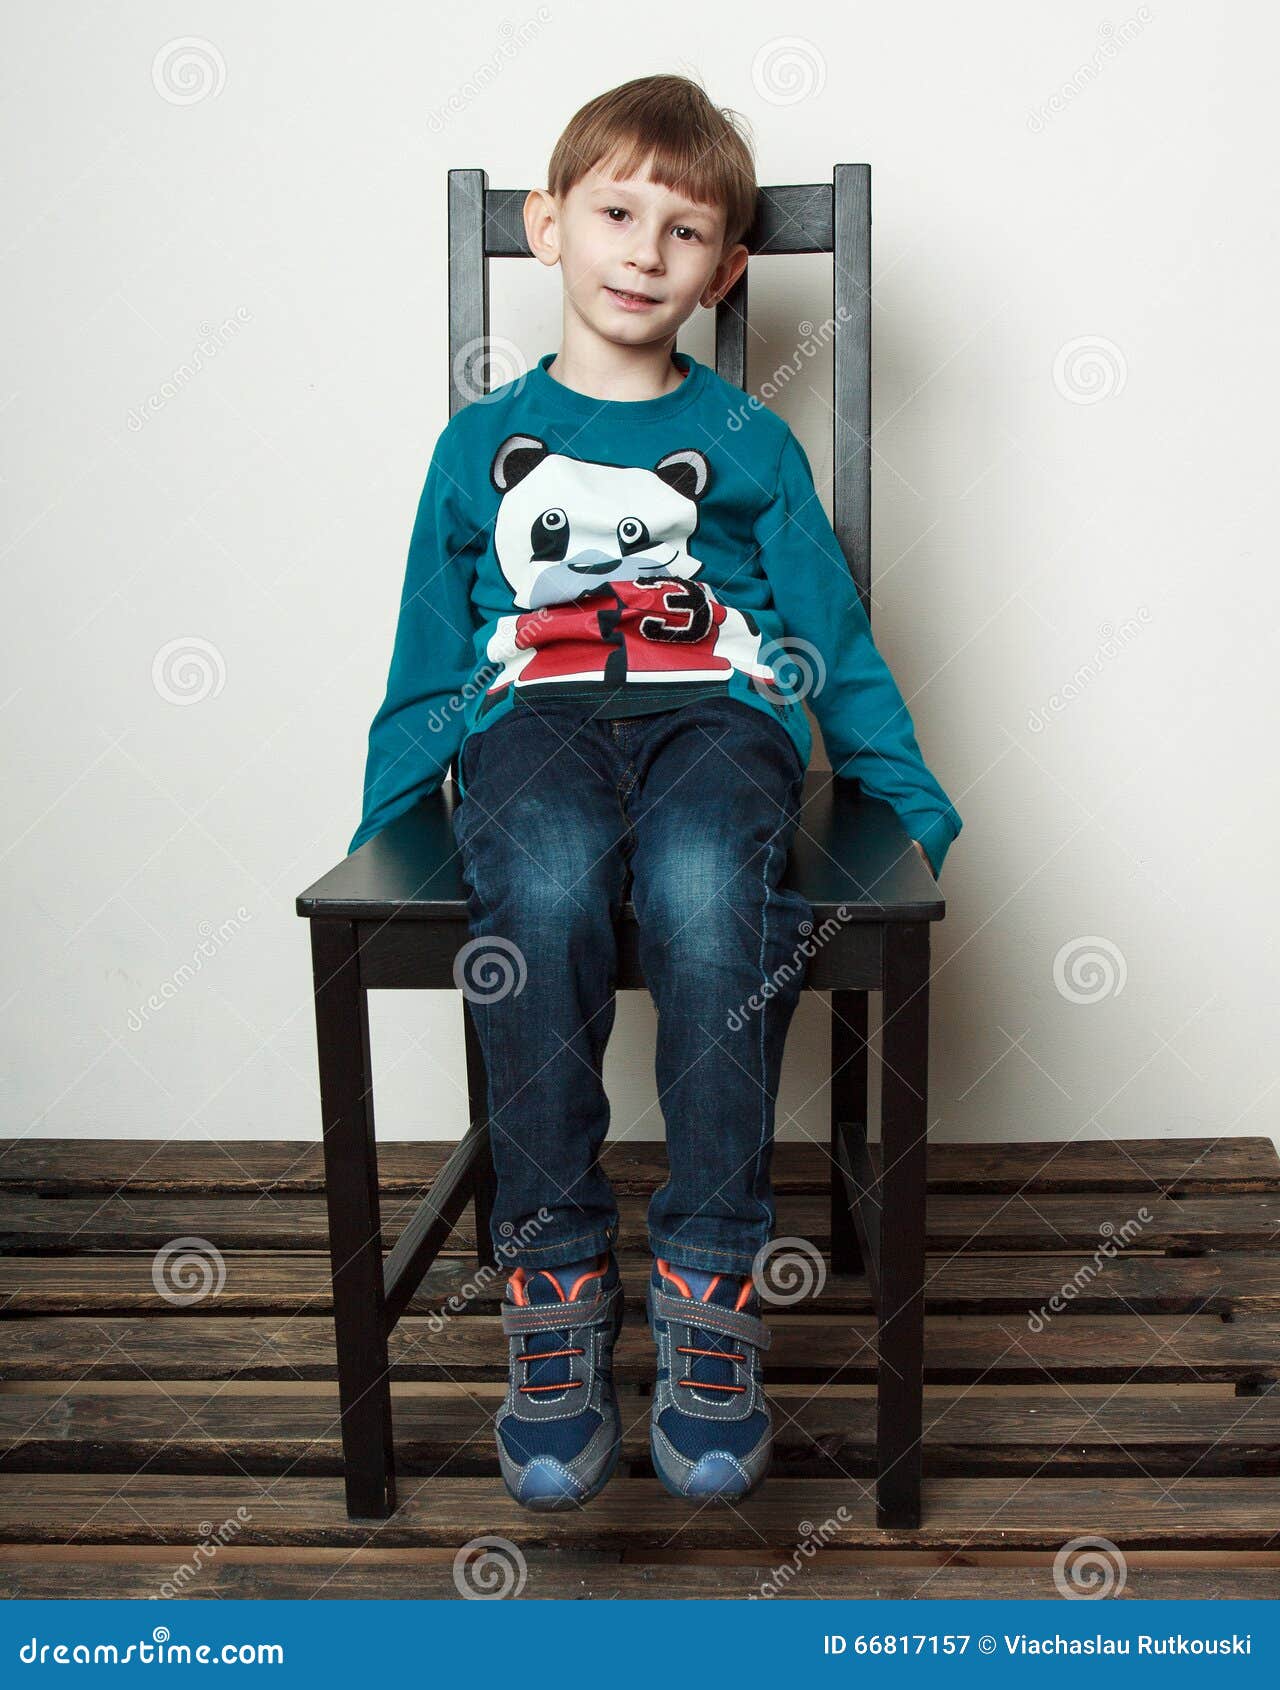 Little Cute Boy is Sitting on the Chair Stock Image - Image of ...